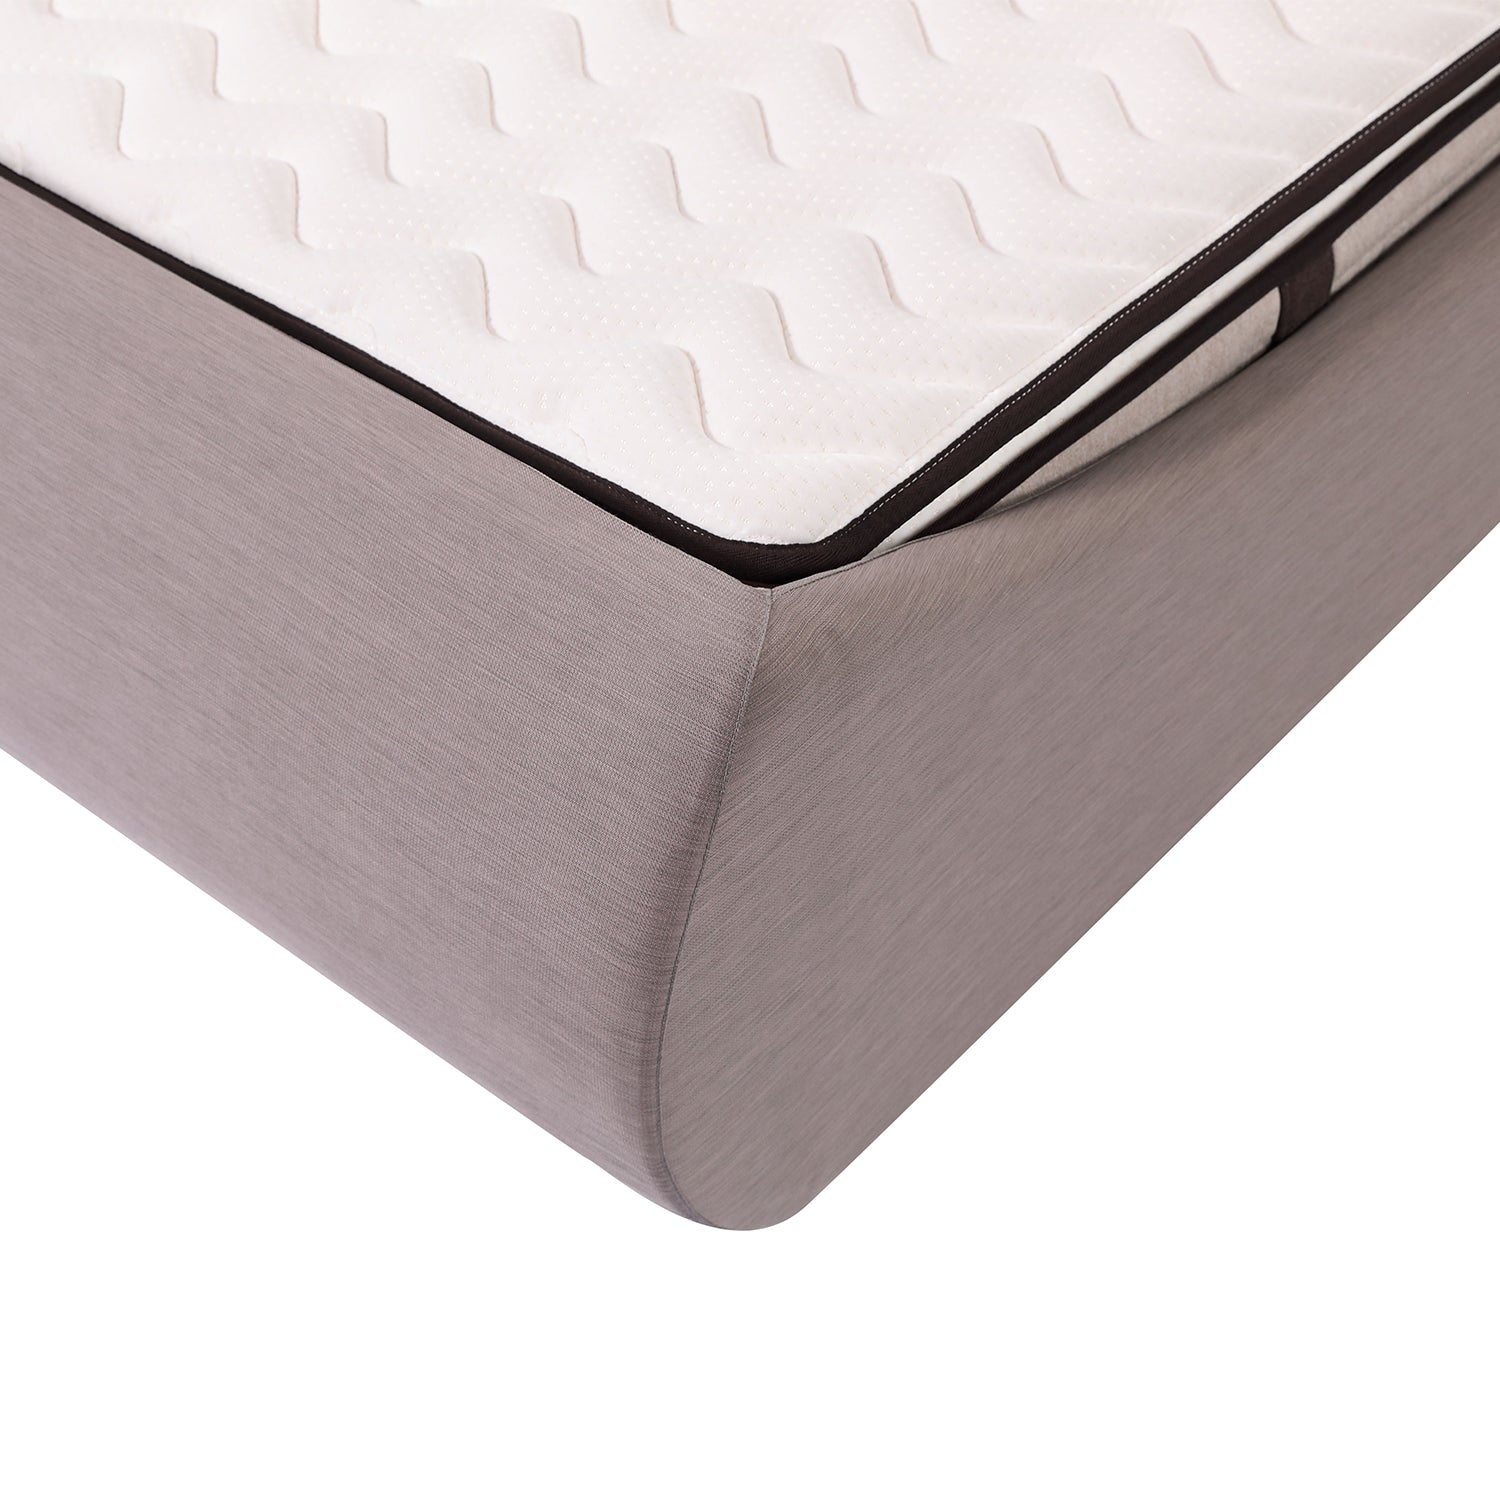 Close-up of DeRUCCI bed frame BZZ4 - 093C featuring sleek, streamlined design with white fabric mattress and grey fabric corner.